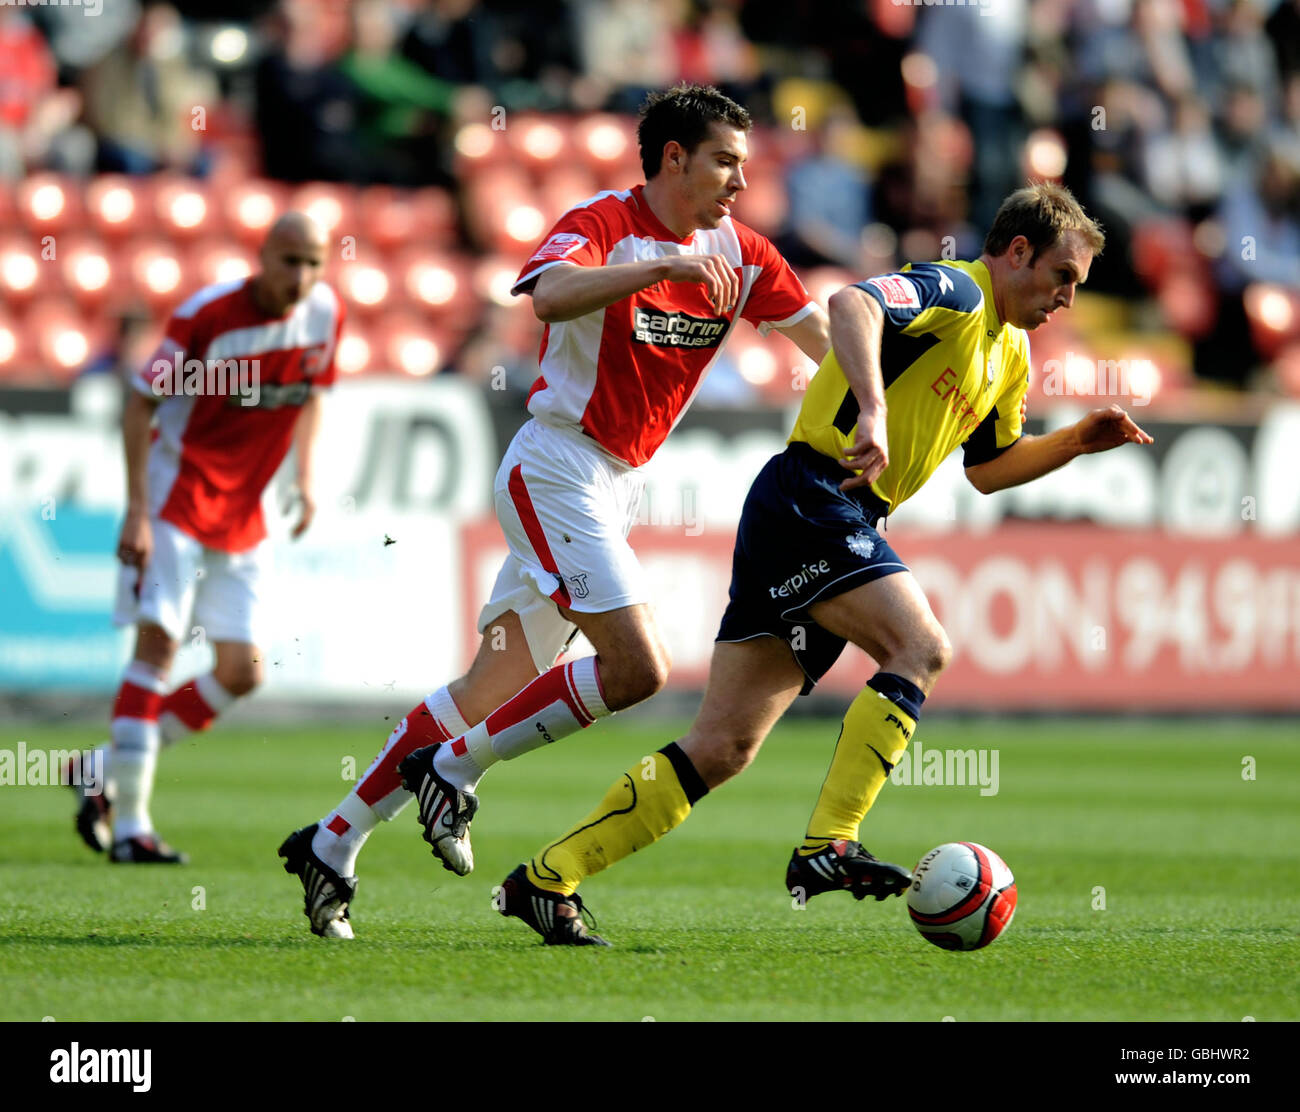 Soccer - Coca-Cola Football League Championship - Charlton Athletic v Preston North End - The Valley. Charlton Athletic's Darren Ambrose and Preston North End's Chris Sedgwick during the Coca-Cola Championship match at The Valley, London. Stock Photo